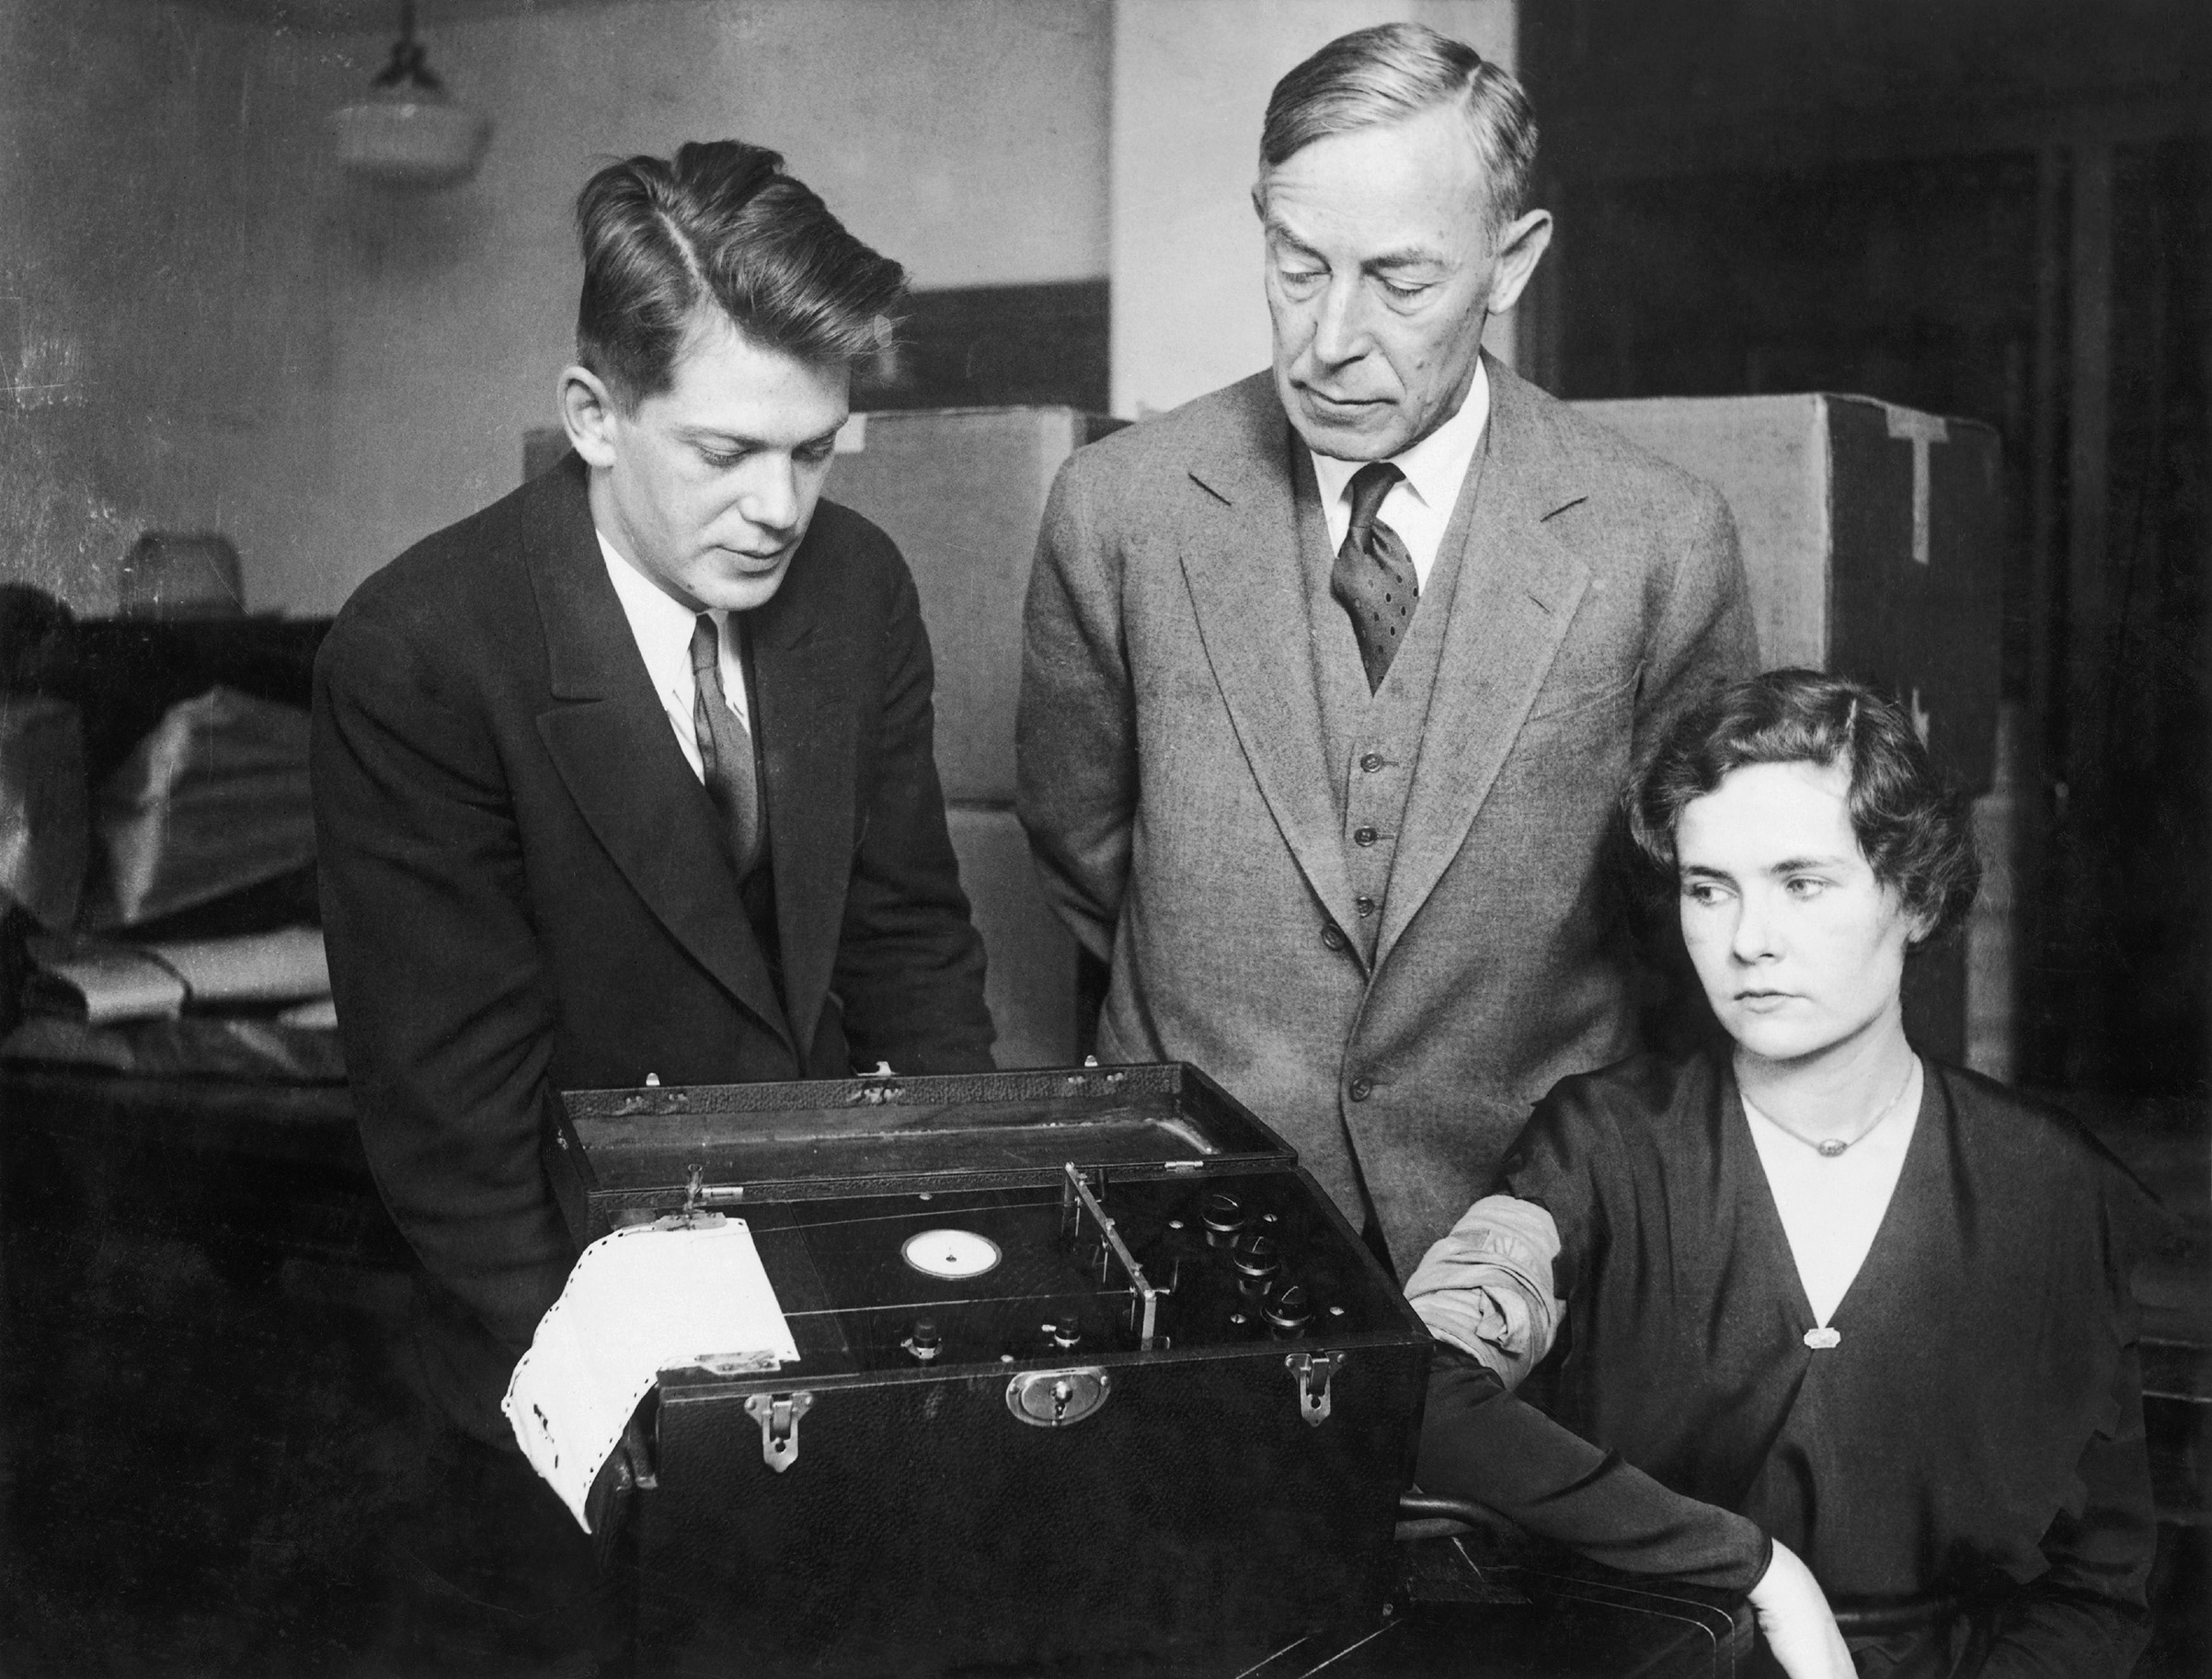 Leonarde Keeler (left) testing his polygraph machine on Marjorie Creighton in presence of August Vollmer during a trial in Chicago in 1932. (Keystone-France/Gamma-Keystone—Getty Images)